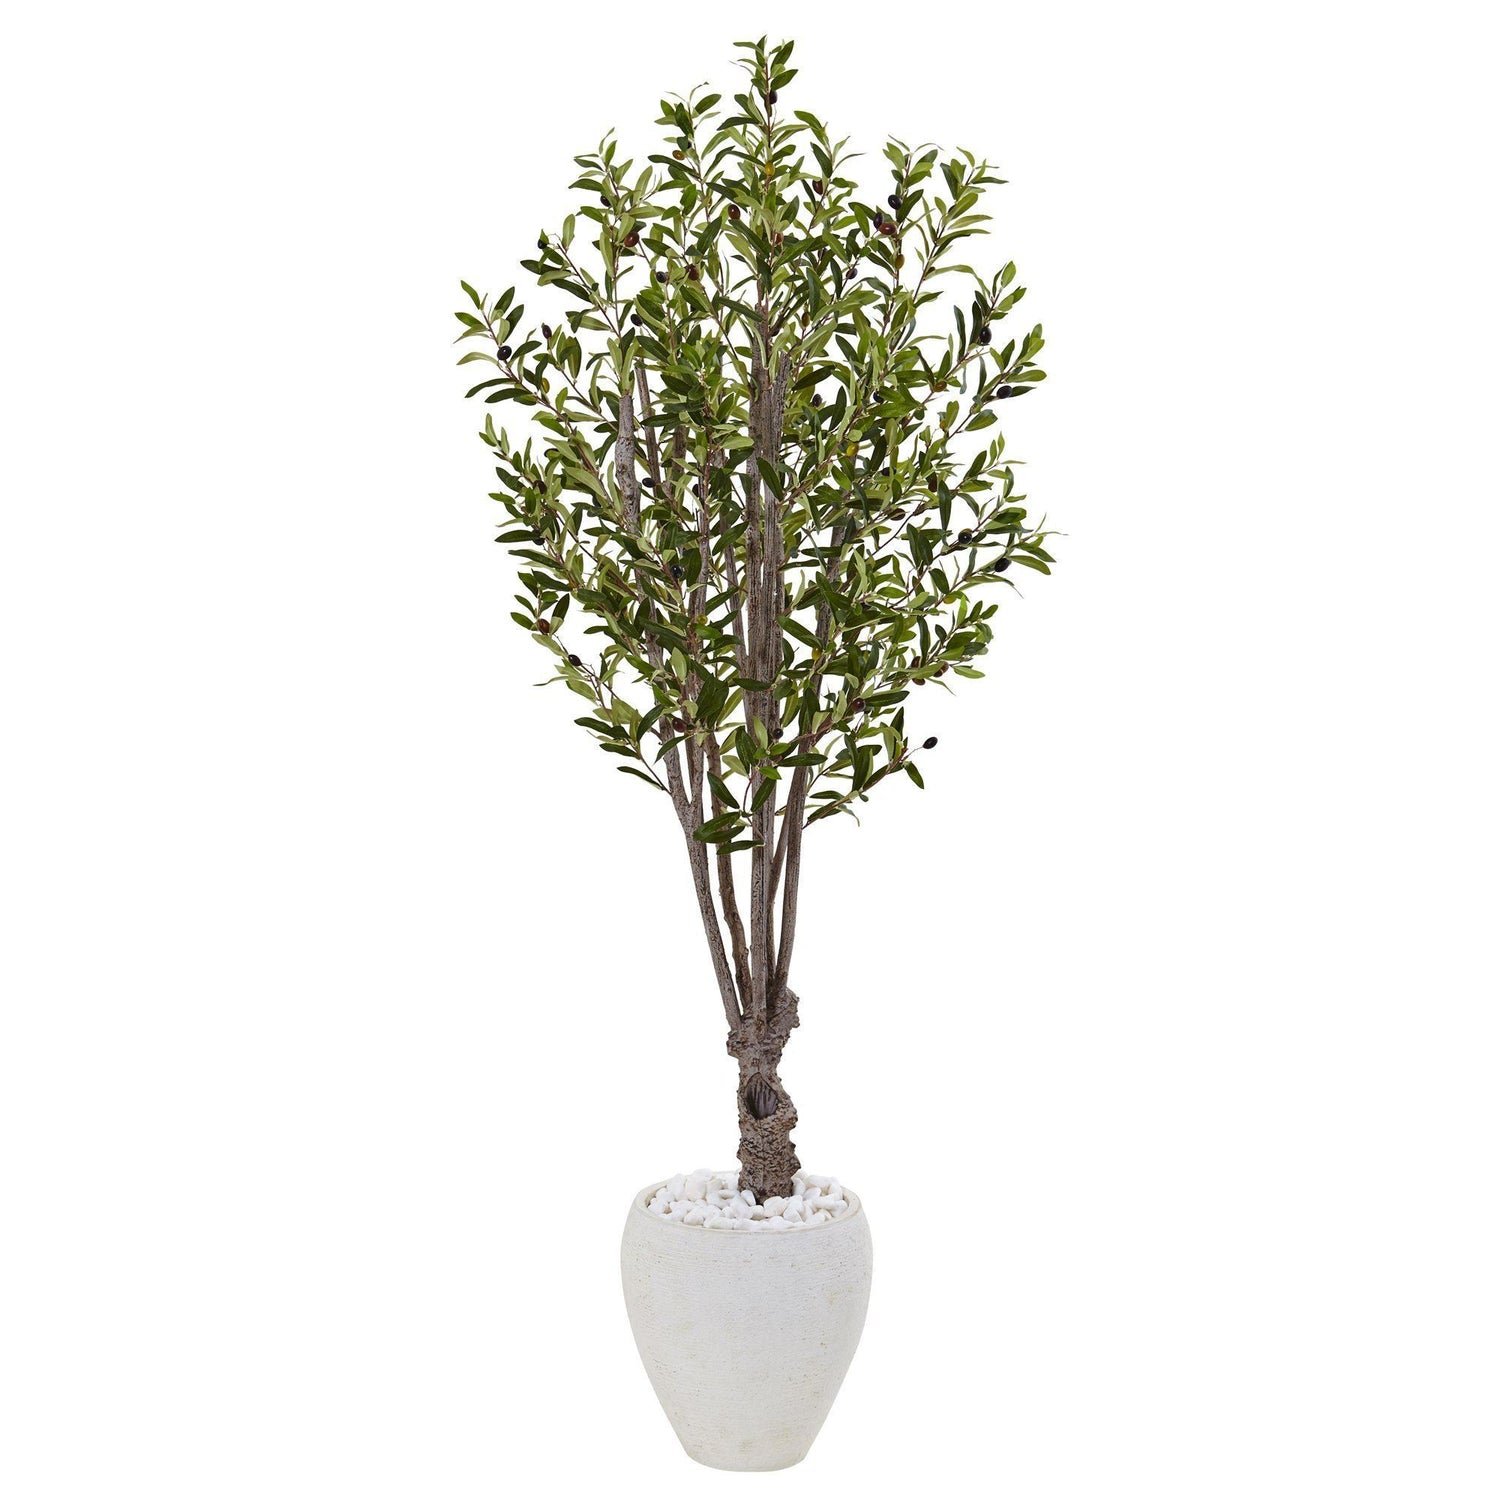 5’ Olive Tree in White Oval Planter